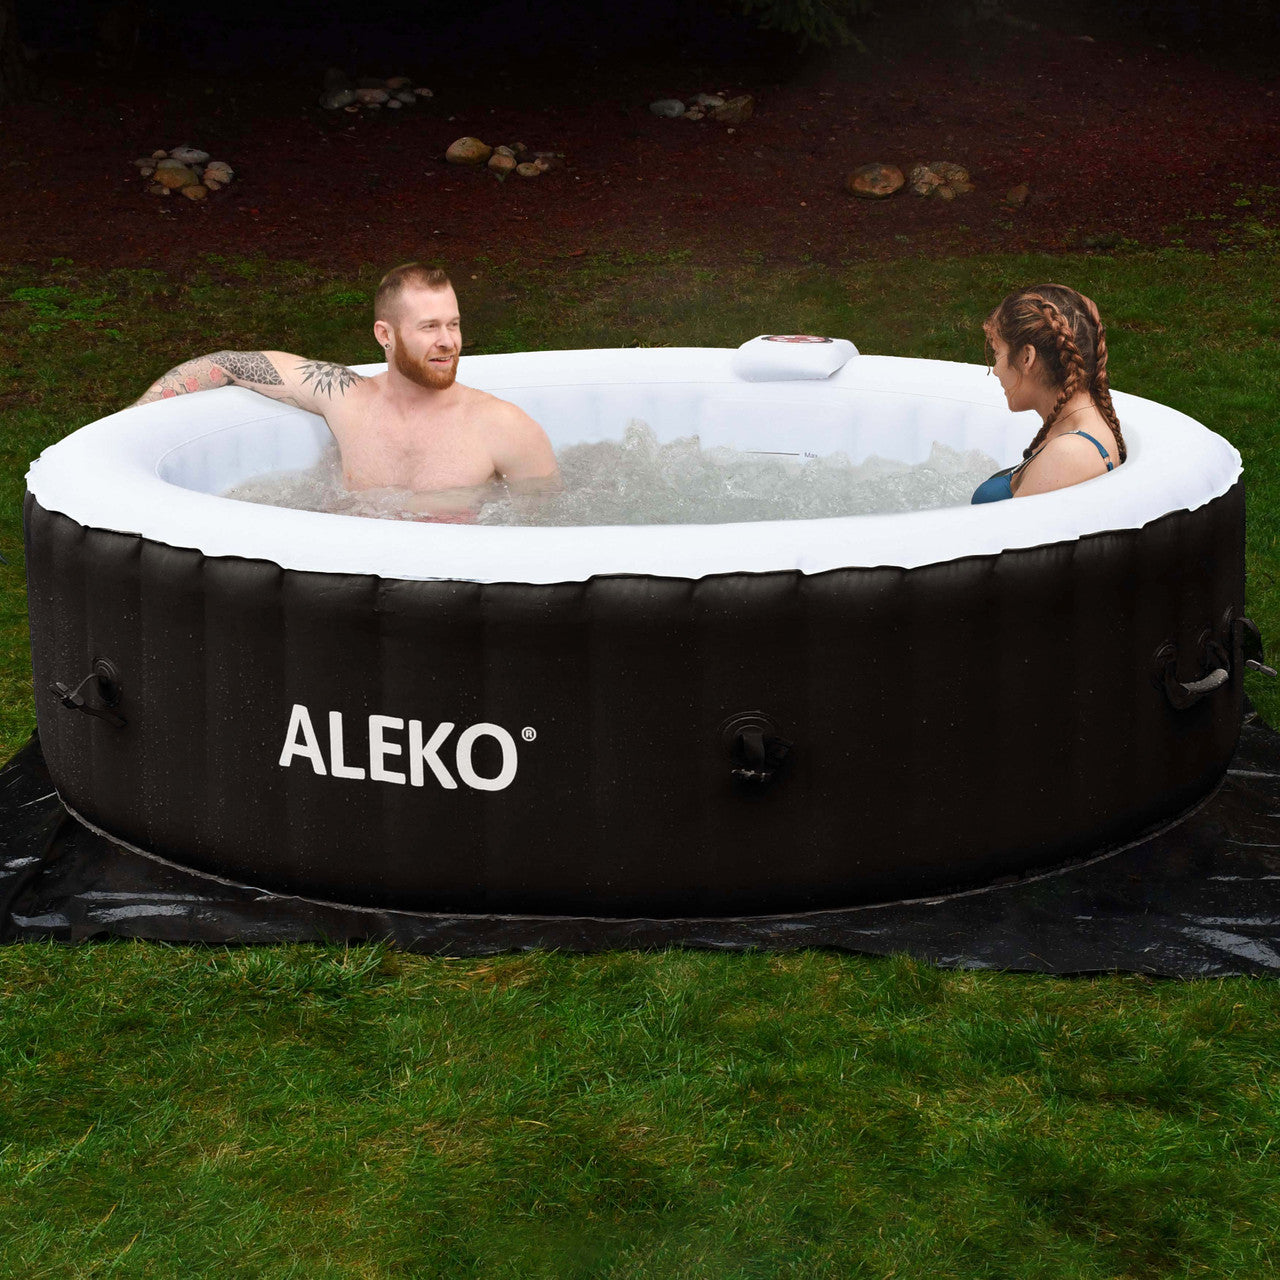 Aleko Round Inflatable Jetted Hot Tub with Cover - 6 Person - 265 Gallon - Black and White  HTIR6BKW-AP - Serenity Provision